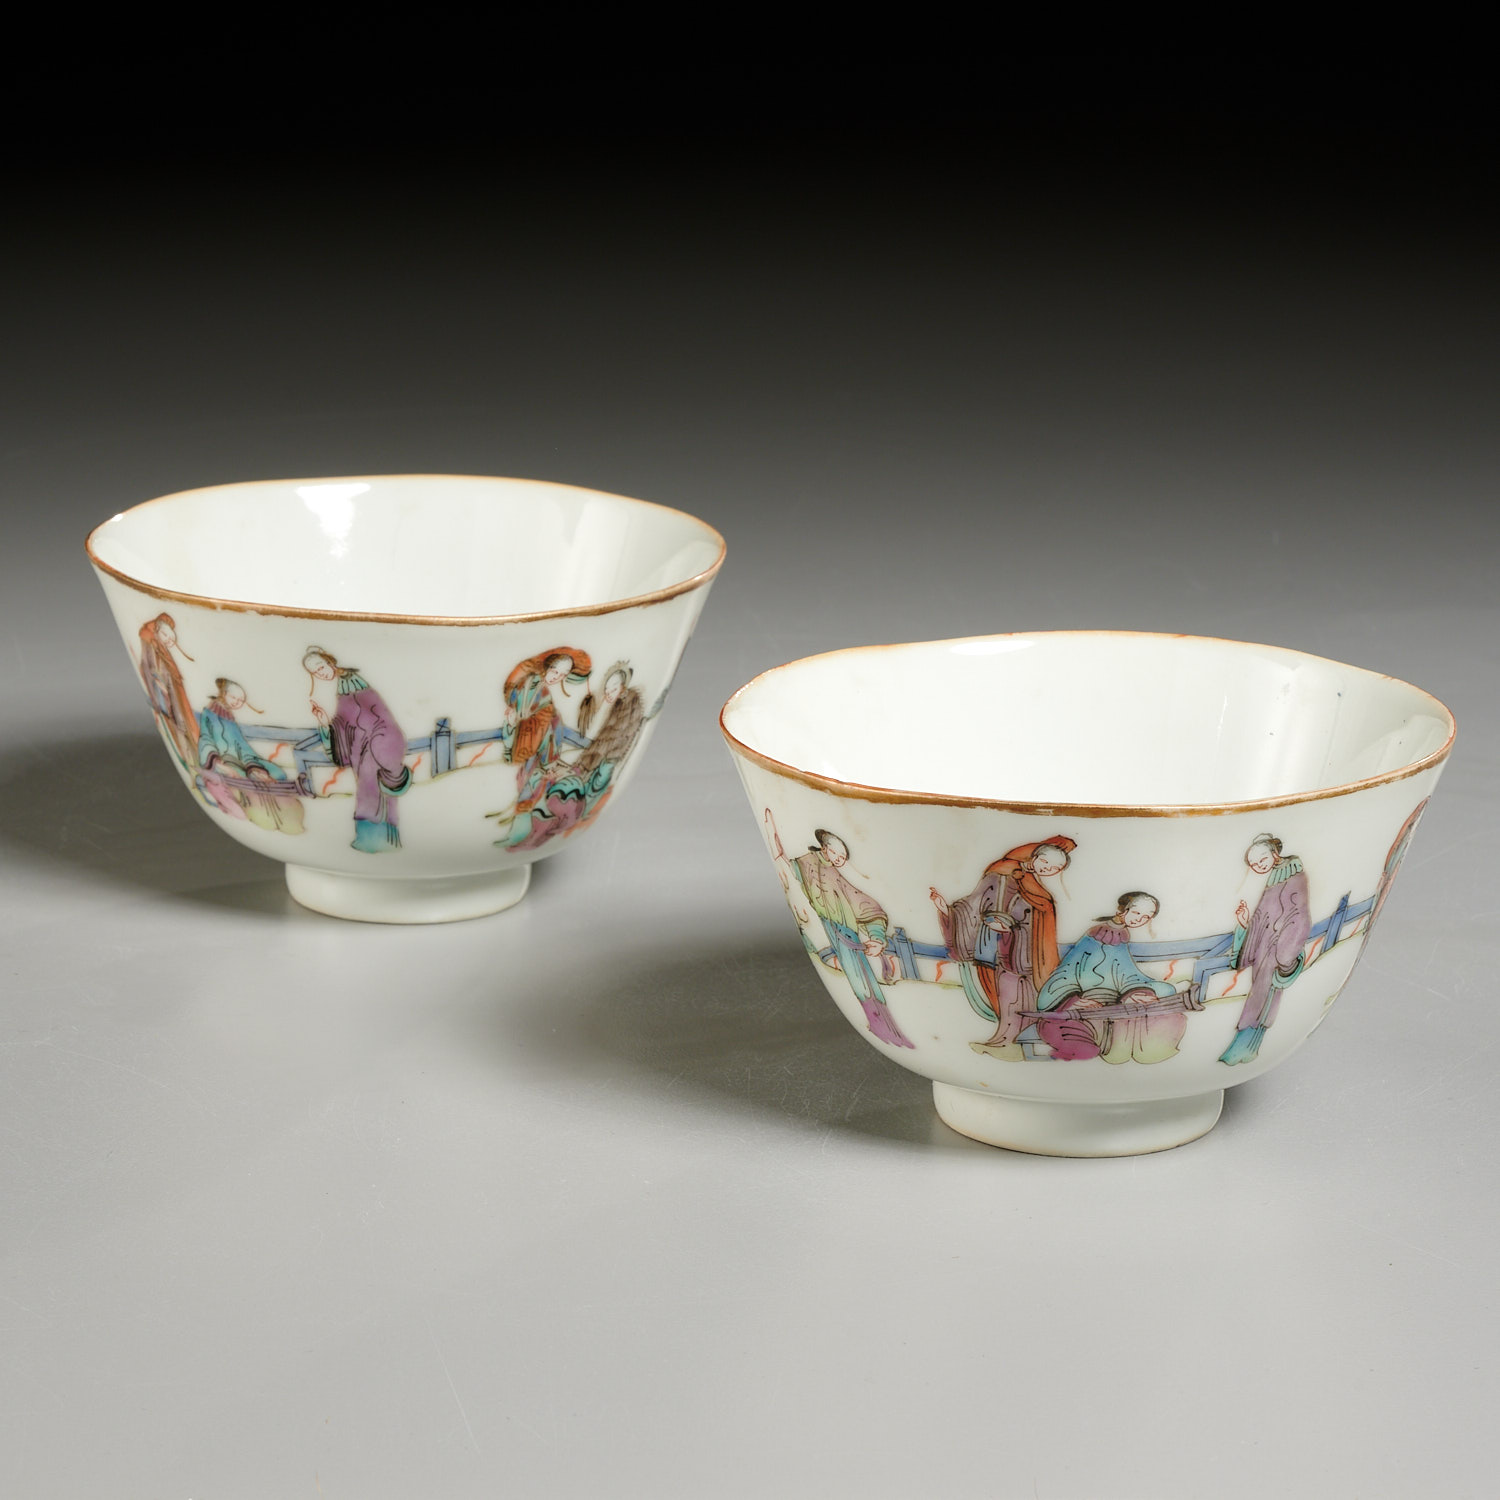 PAIR CHINESE FAMILLE ROSE TEACUPS 2ce7a3